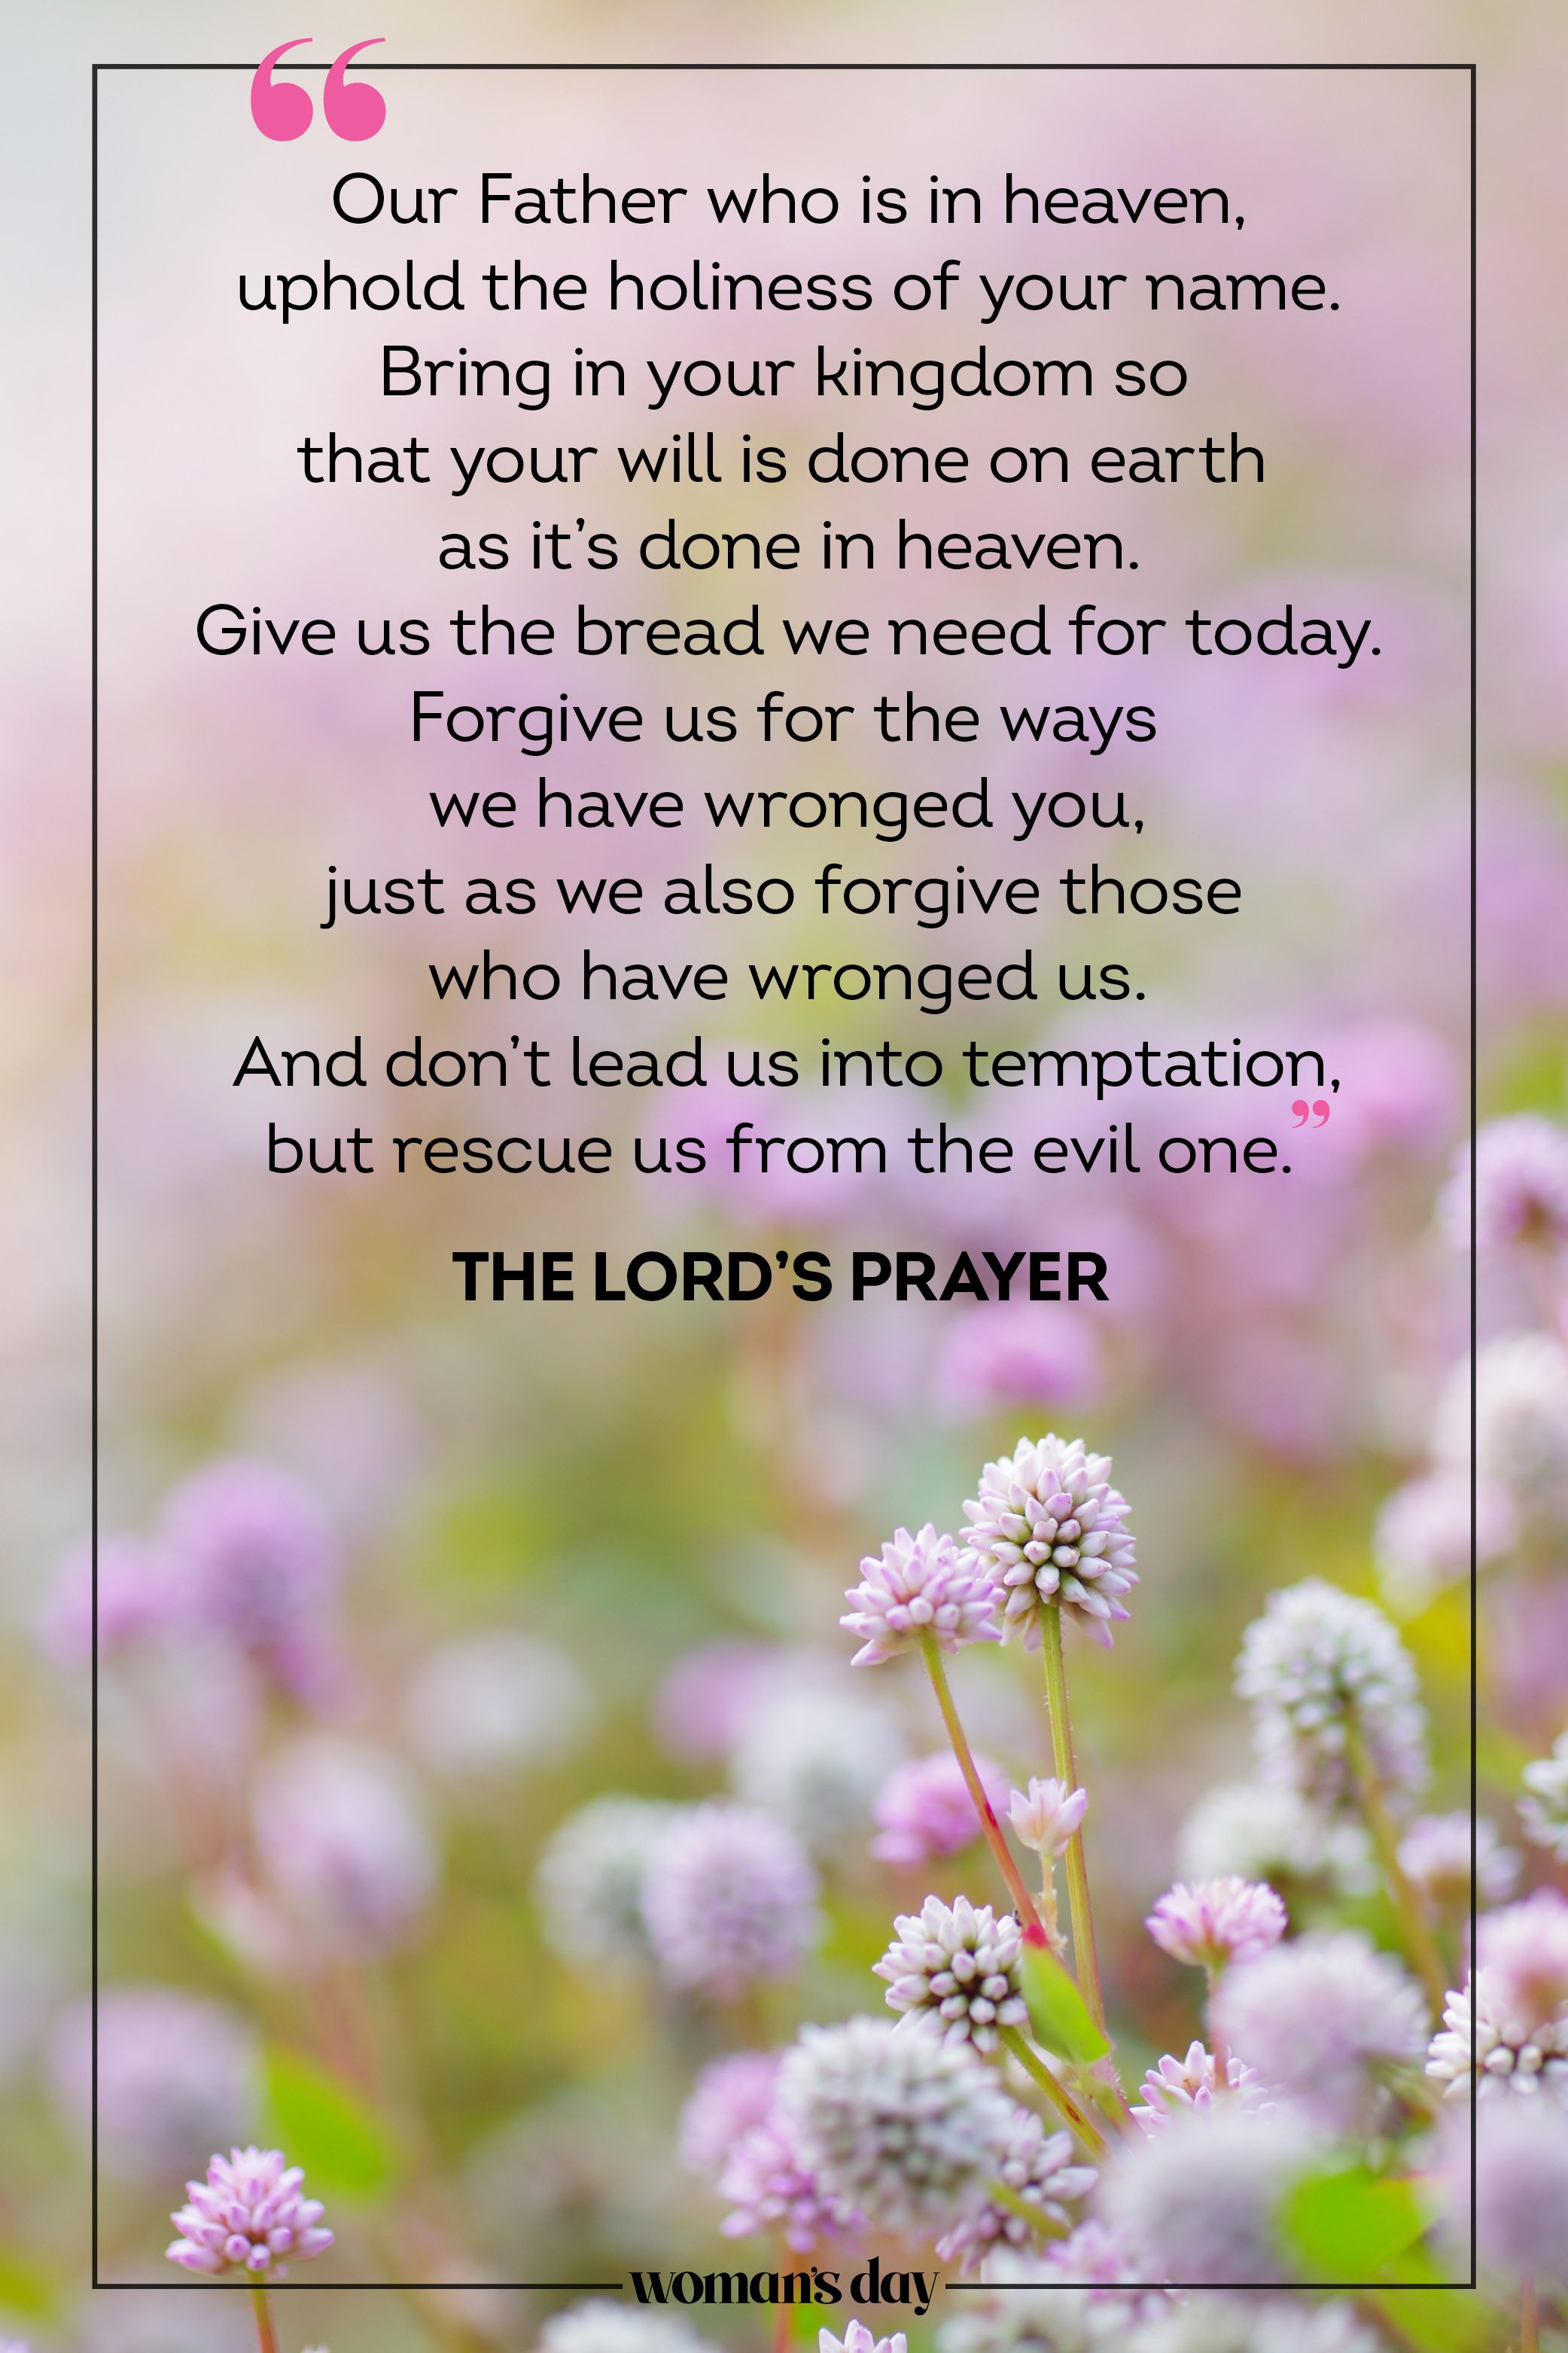 How to Pray the Lord's Prayer: Ways to Say & Use This Prayer